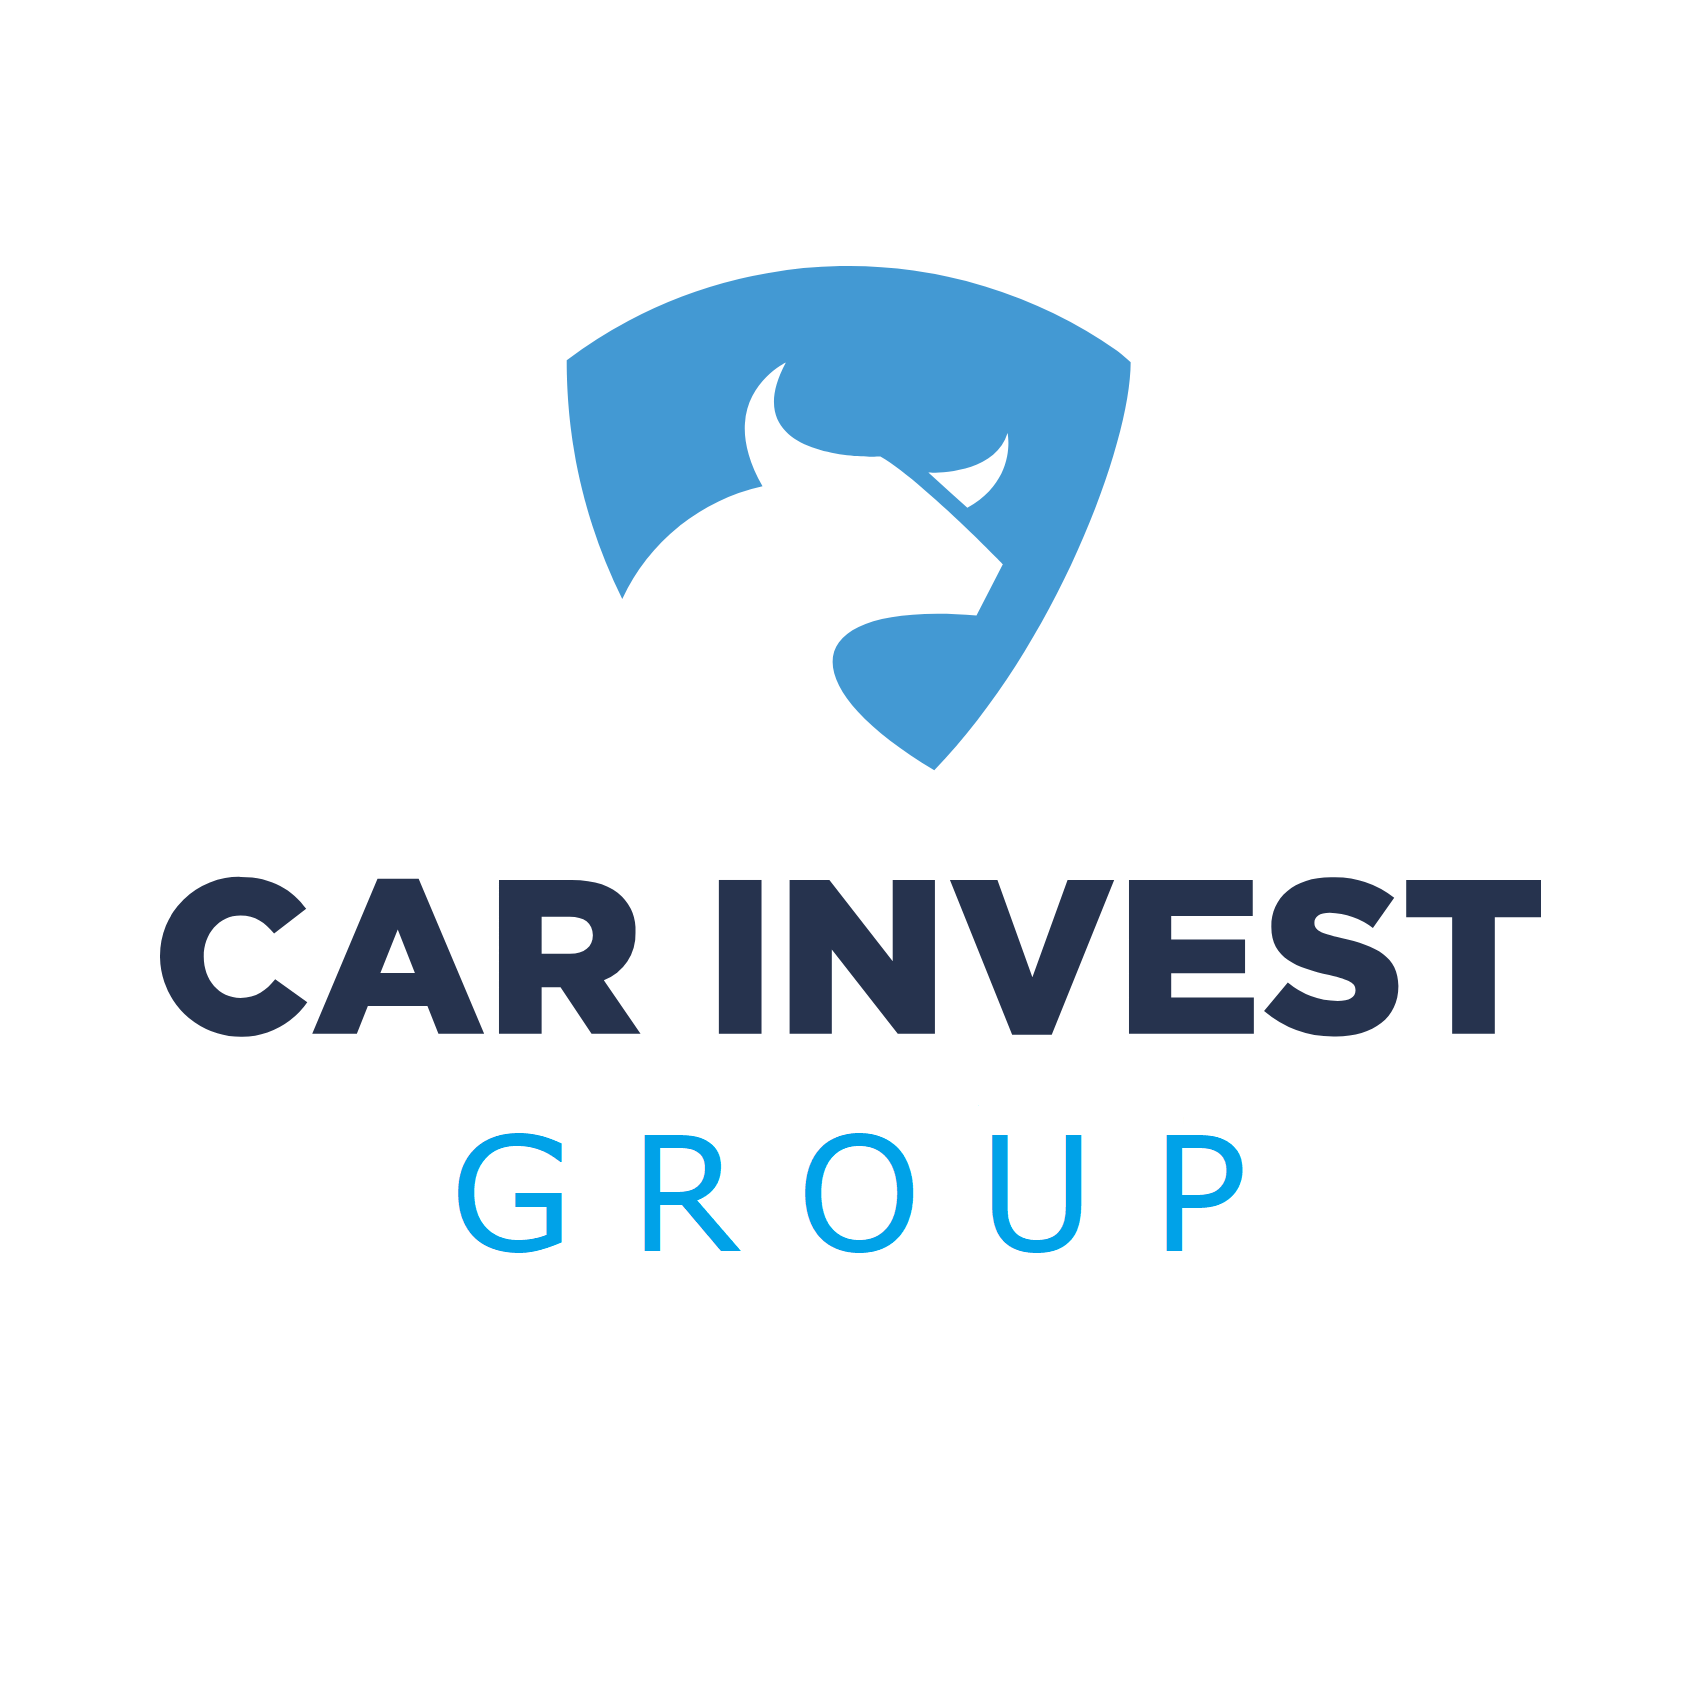 Carinvest group